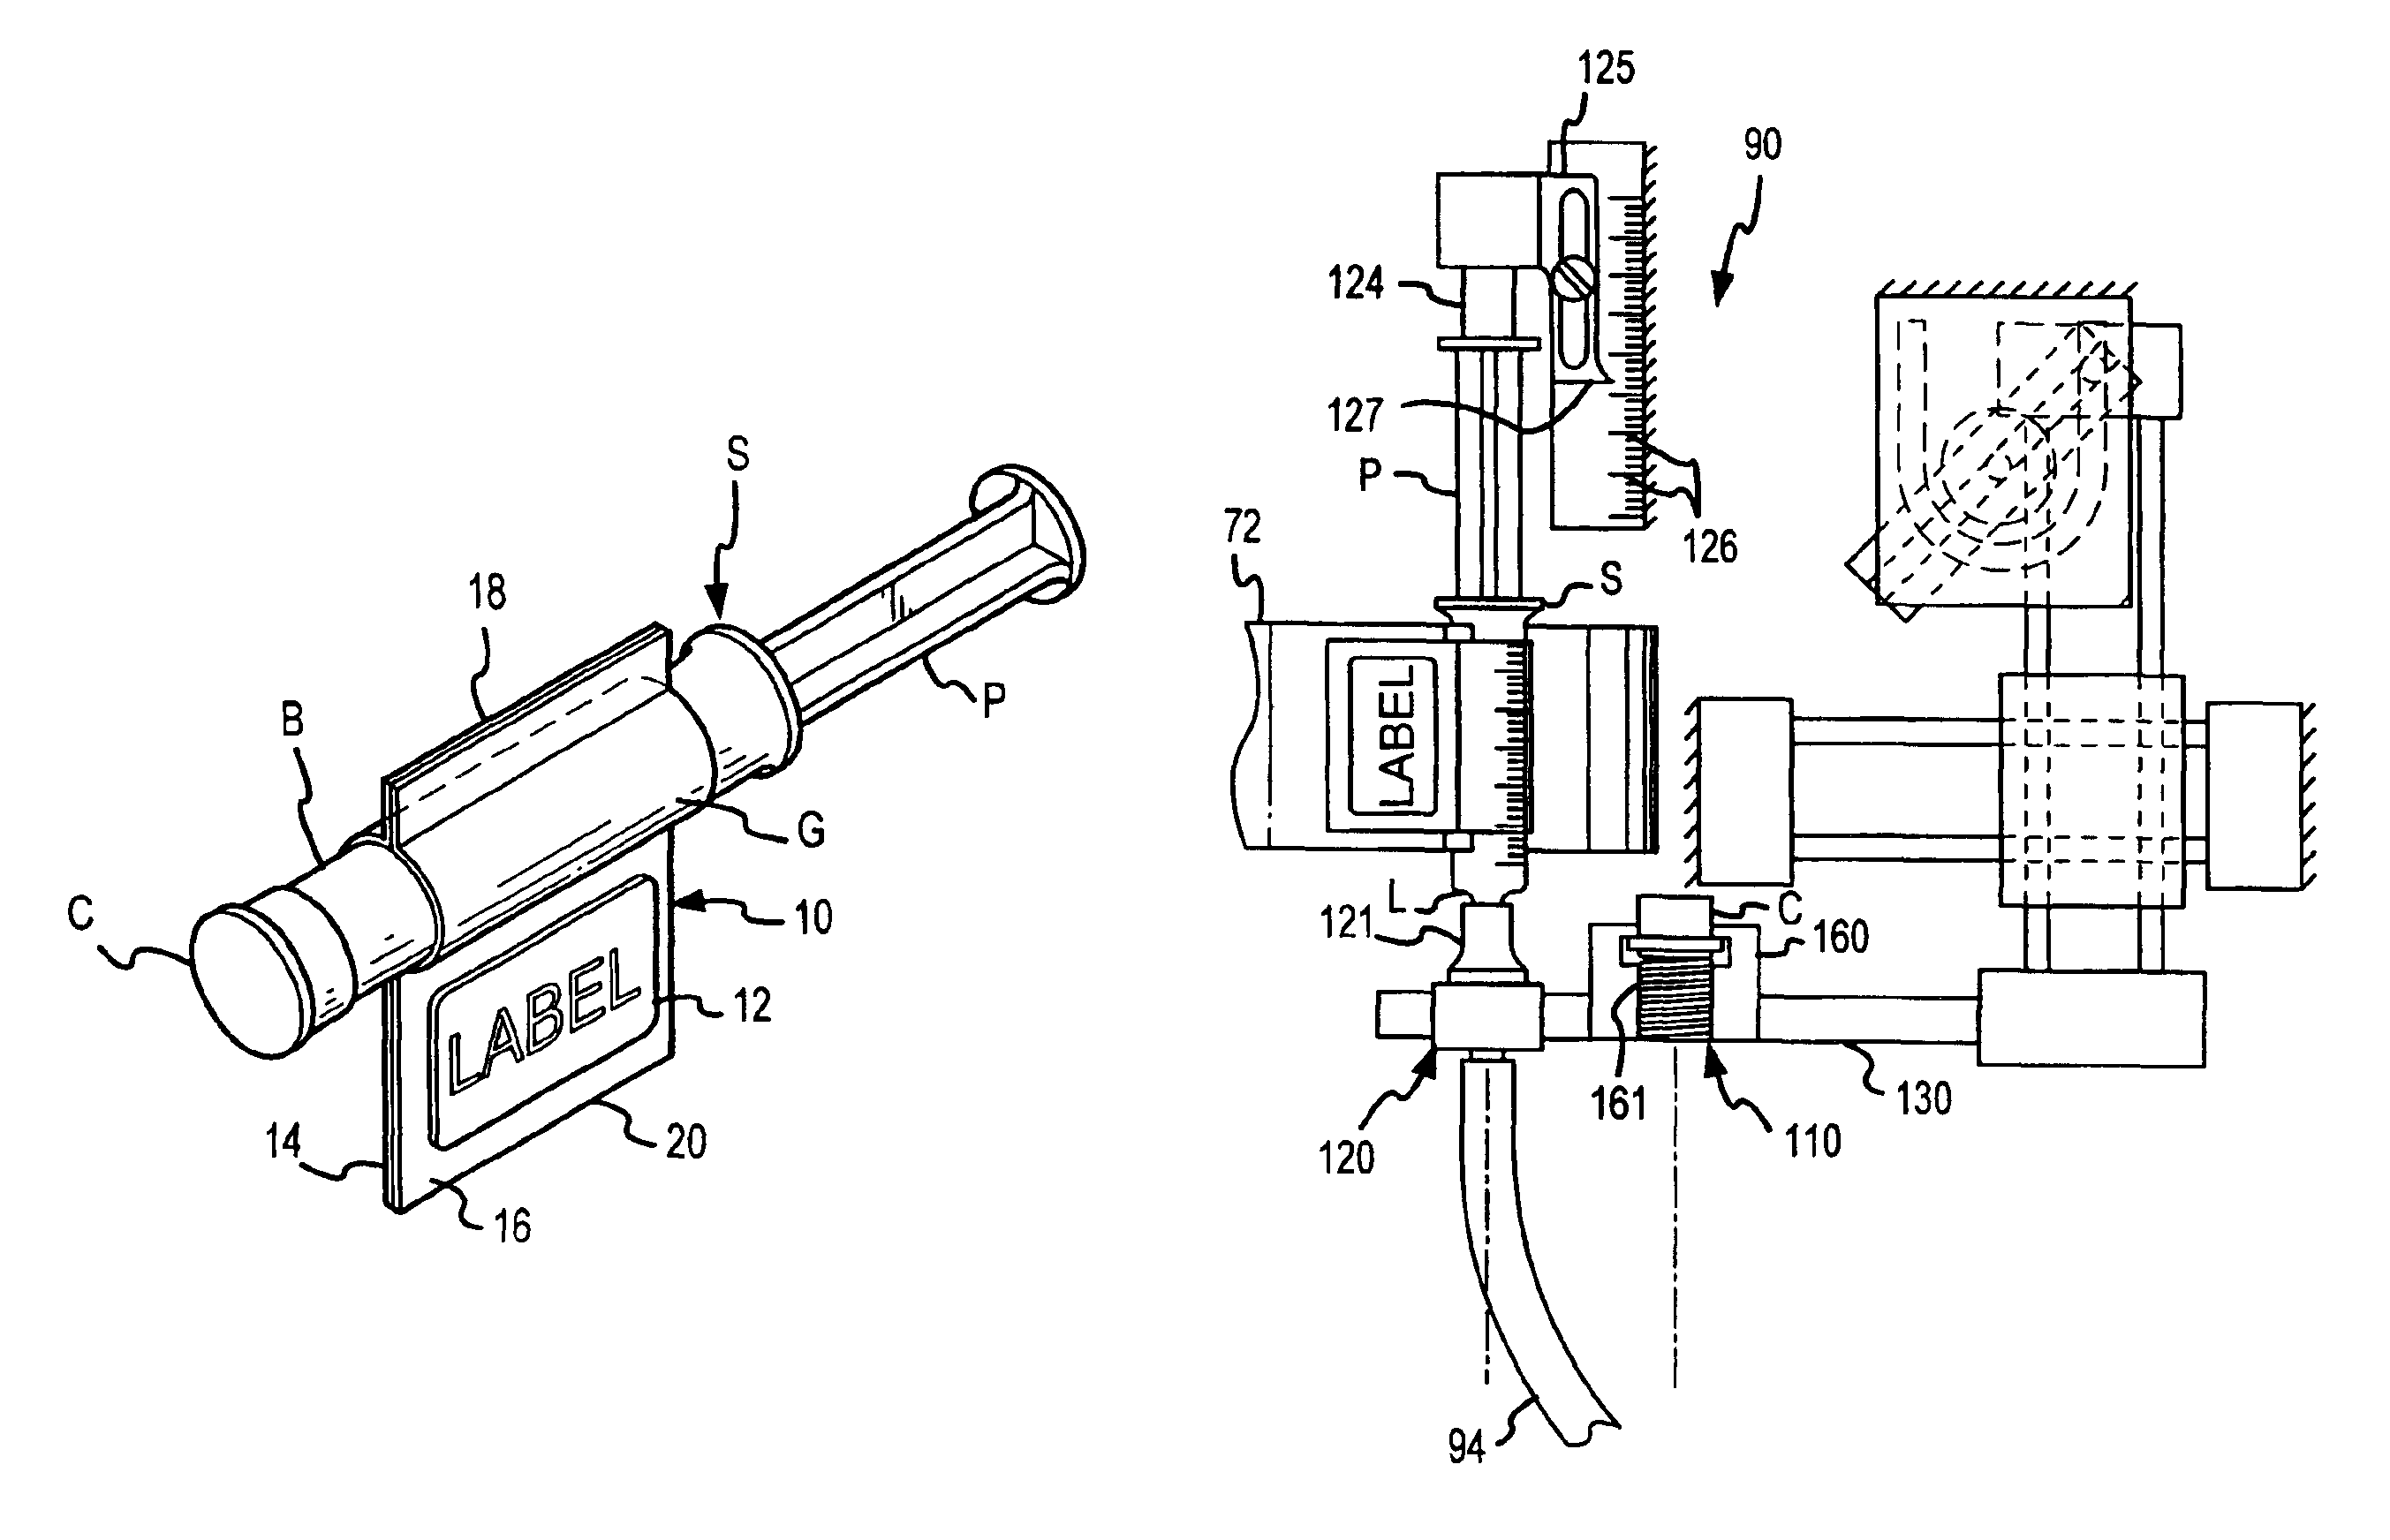 Method for filling and capping syringes